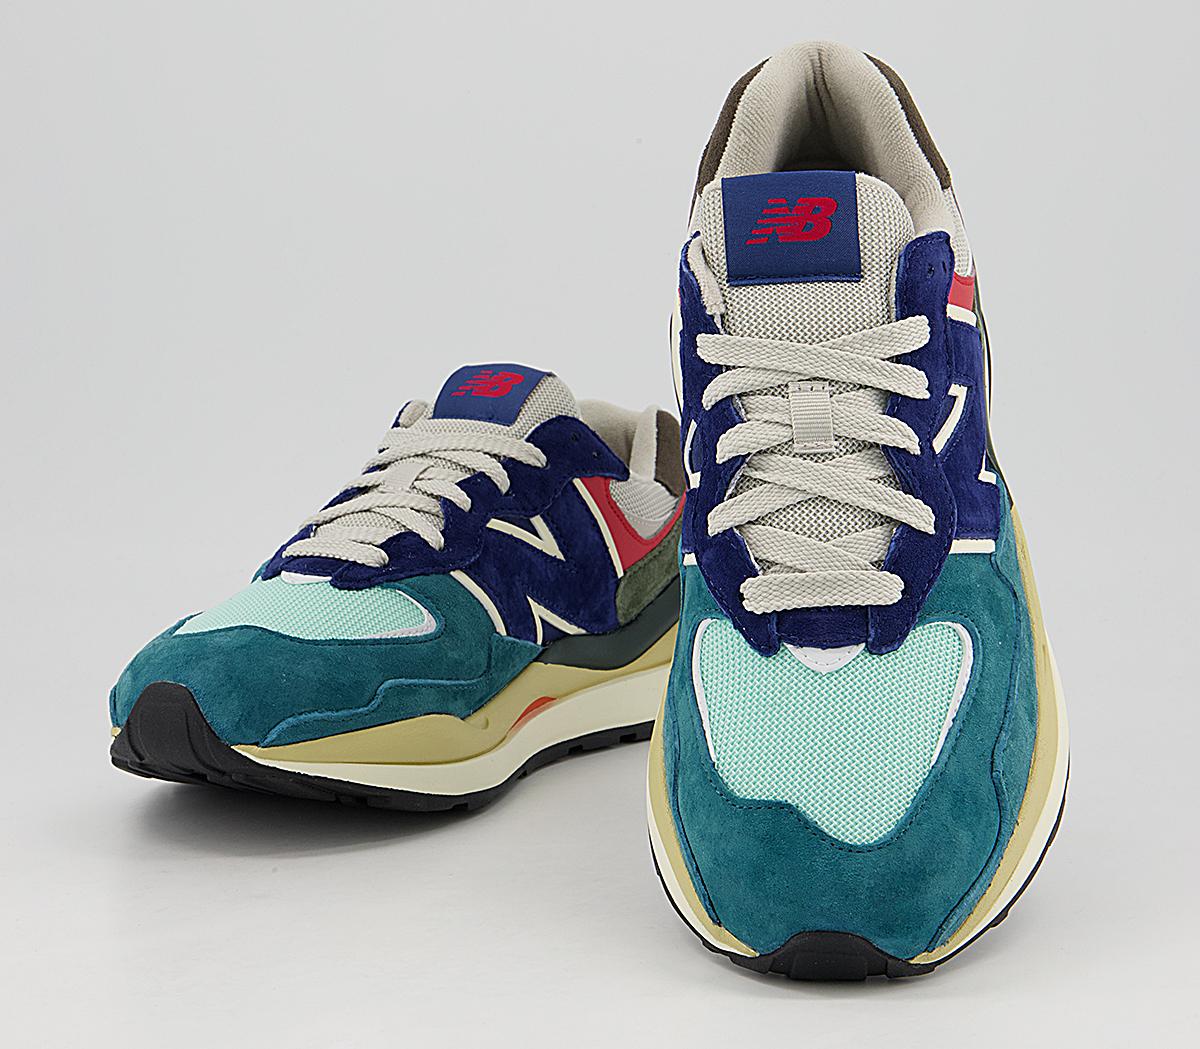 New Balance M5740 Trainers Light Cliff Grey Teal - His trainers